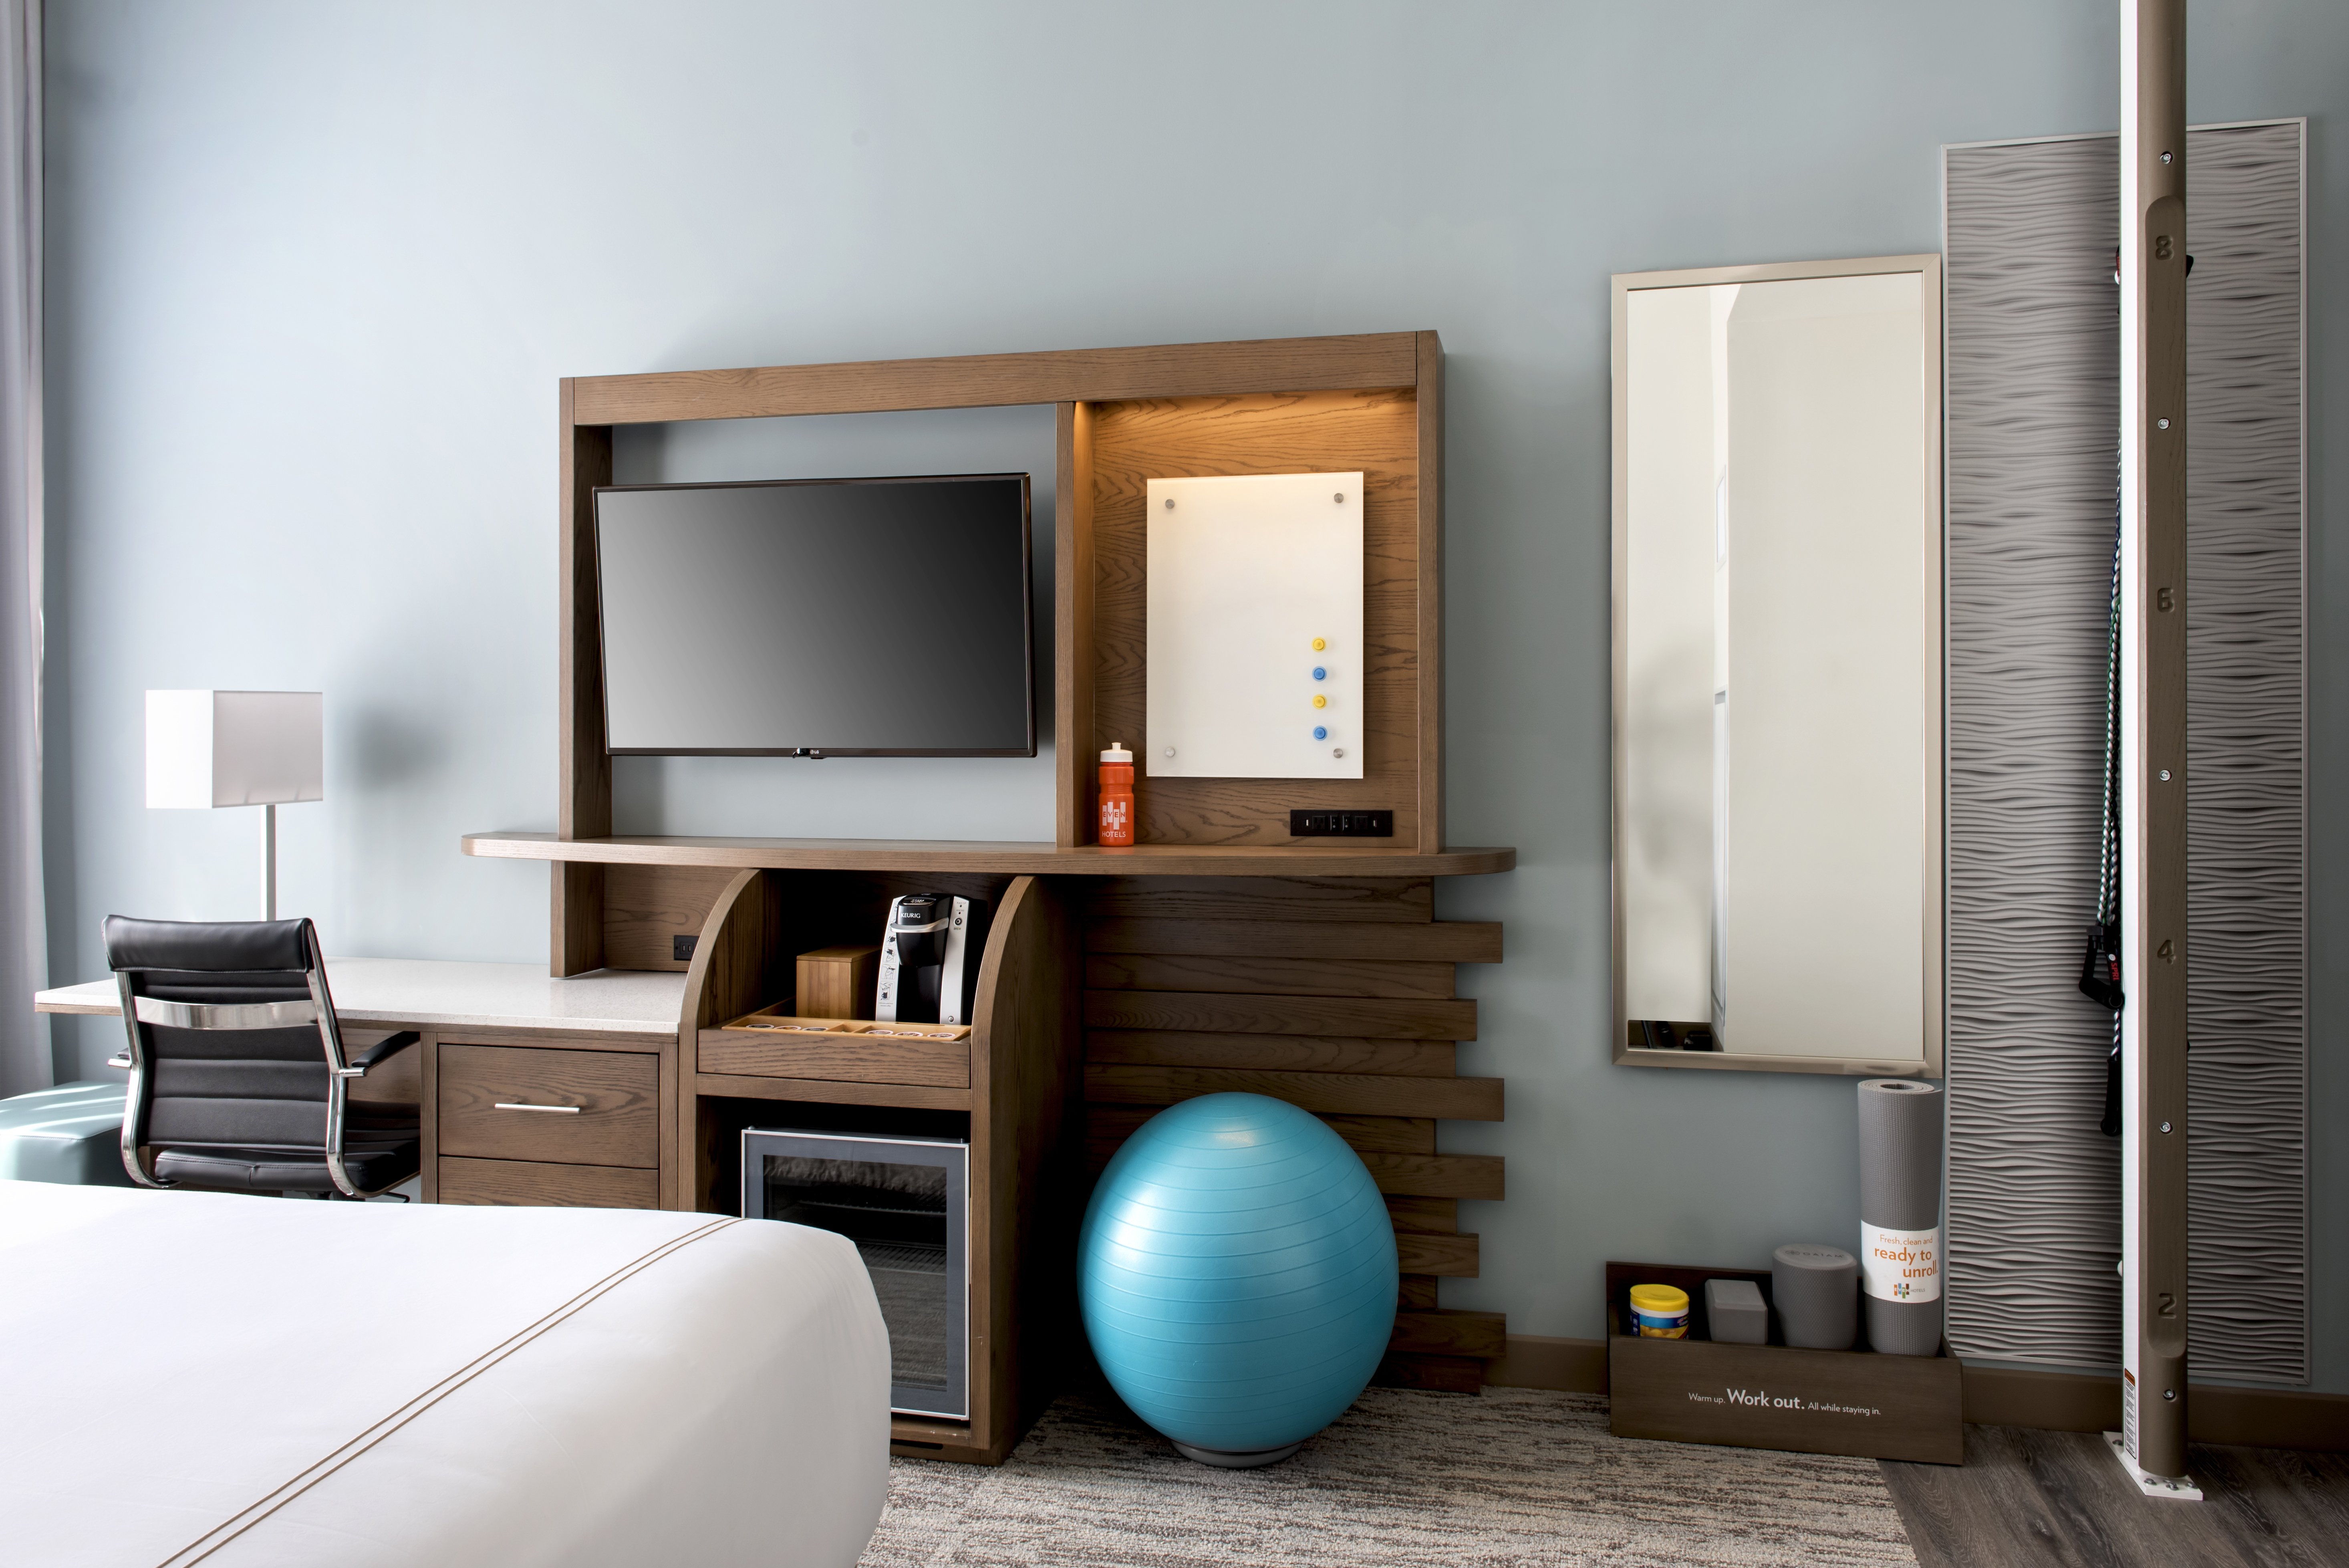 Rooms include a fitness zone and standing desk.